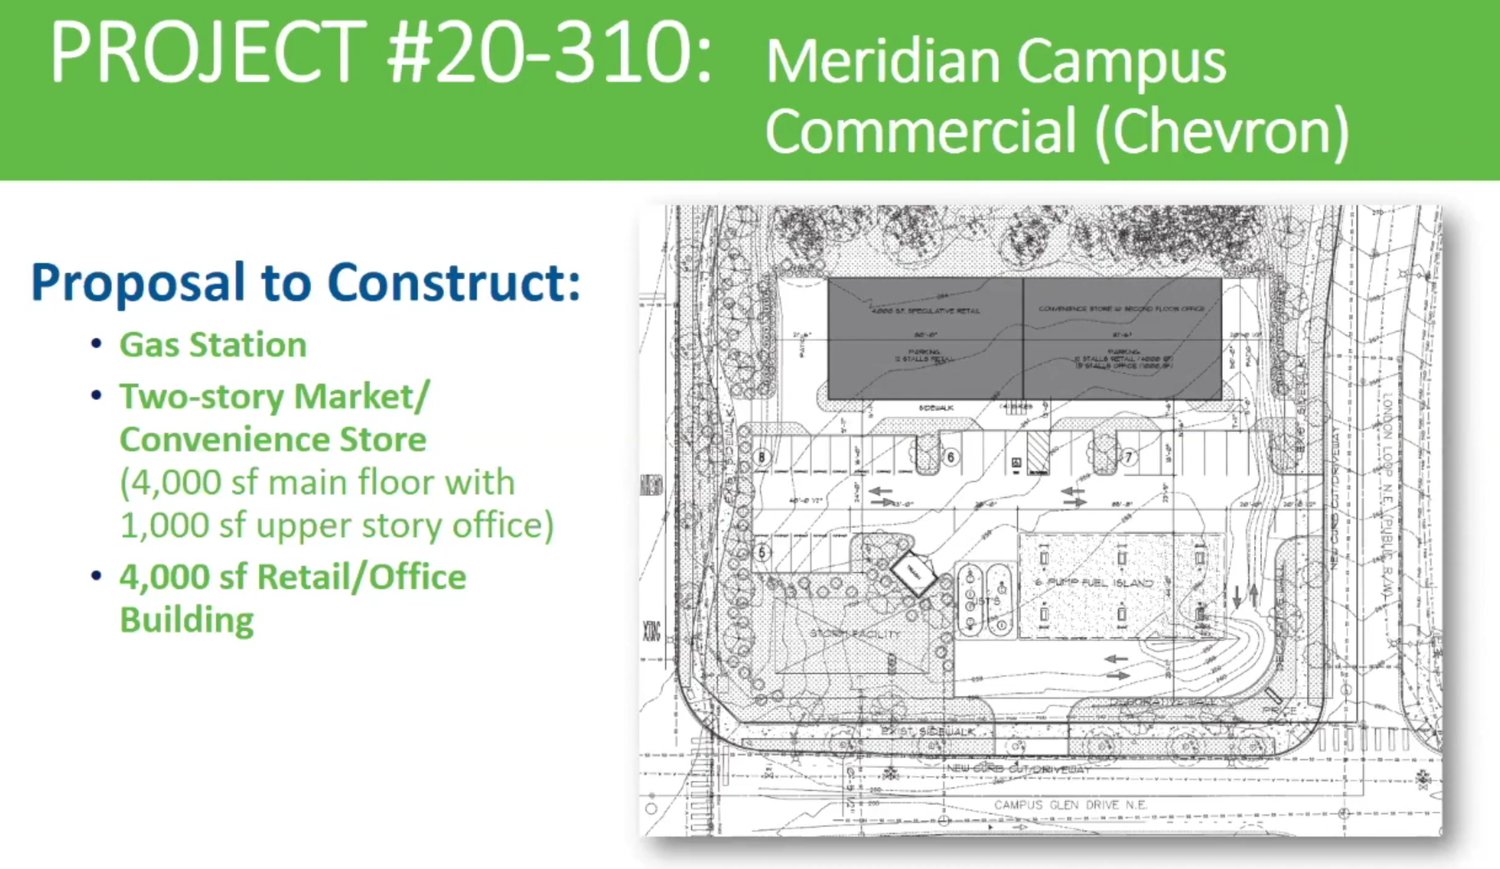 This drawing shows the plan for a proposed small commercial development in the Meridian Campus in northeast Lacey, as discussed on May 20, 2021 by the Lacey Planning Commission.